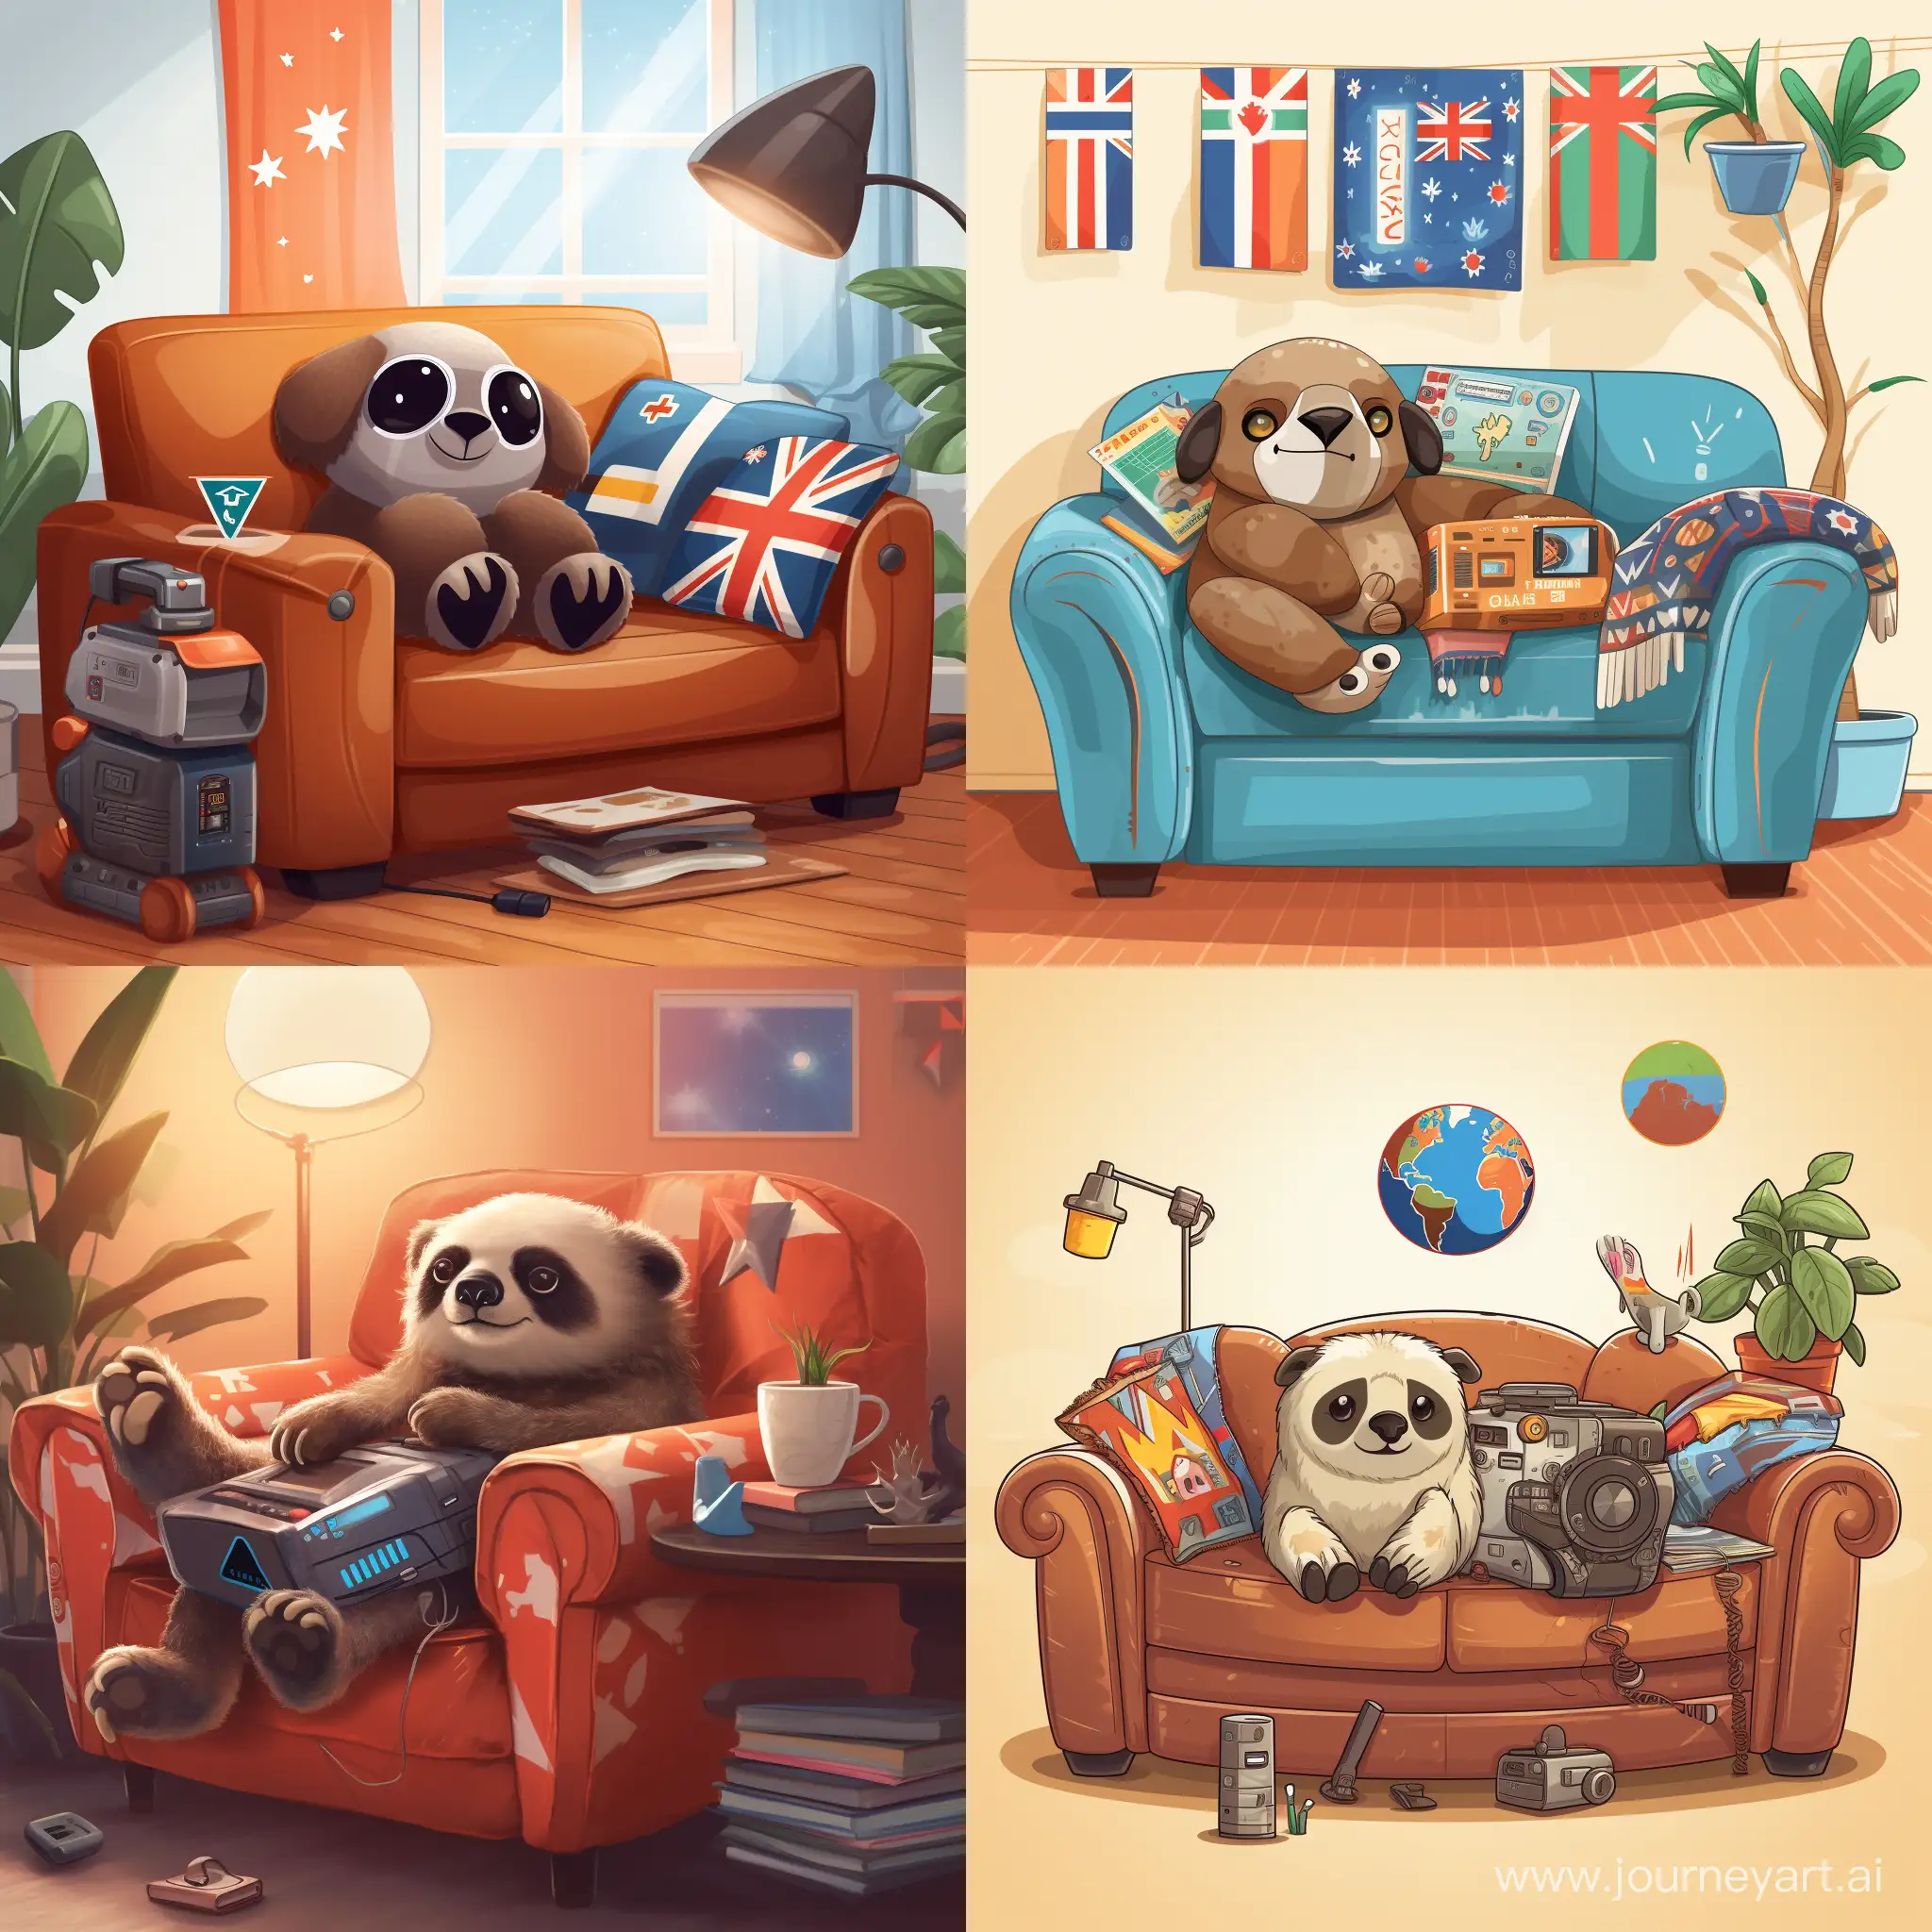 Cute robot animal on couch. Happy, resting, slothful, indolent. Include localization, globe, countries, languages and flags.